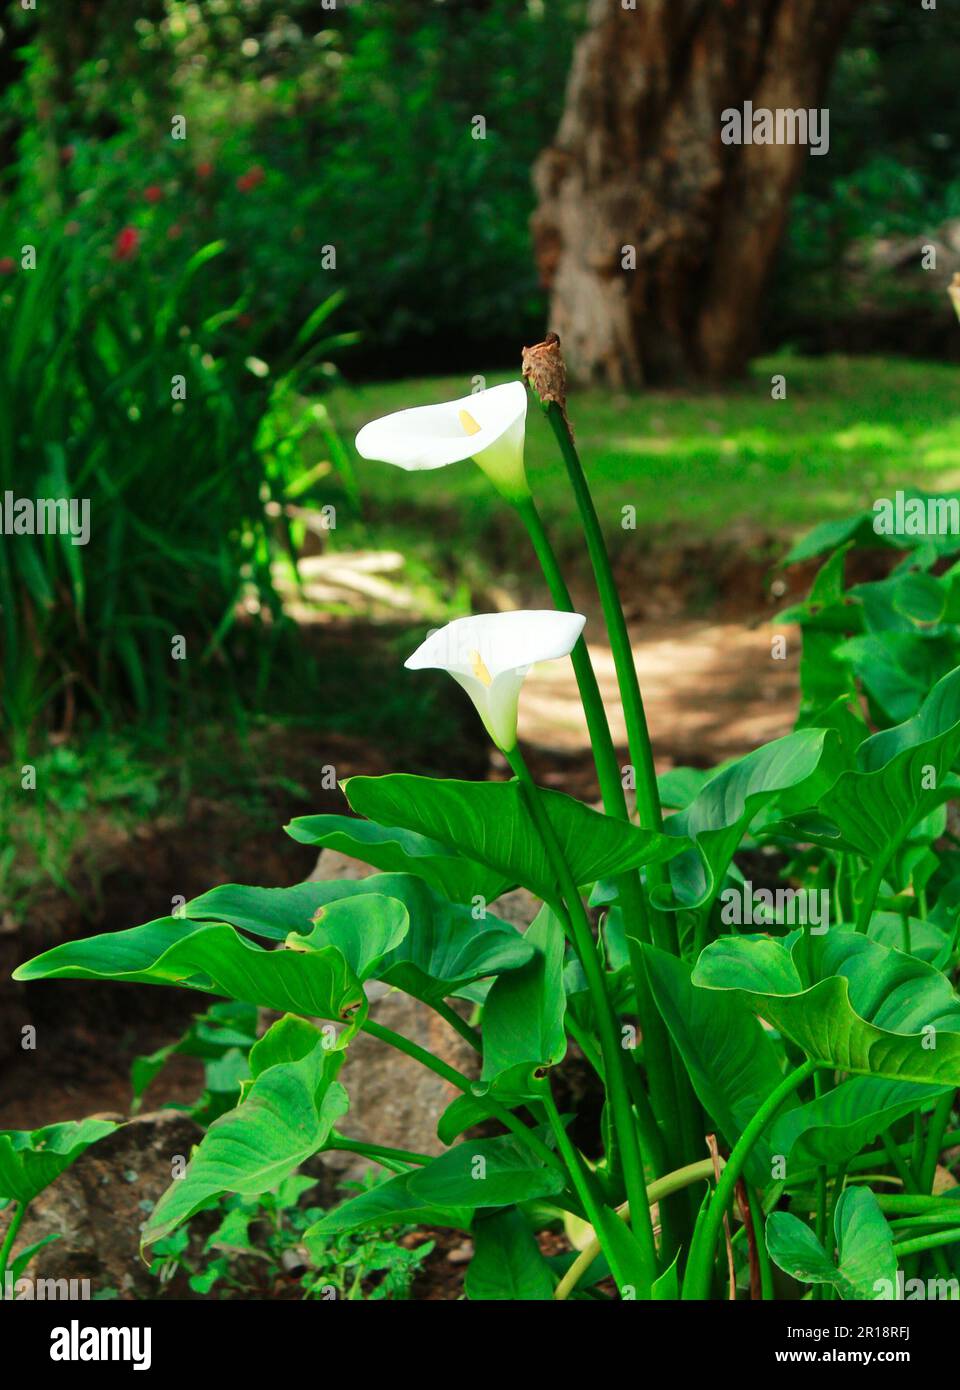 Arum lily (Zantedeschia aethiopica) flowers in a garden. Isolated calla lily flowers Stock Photo